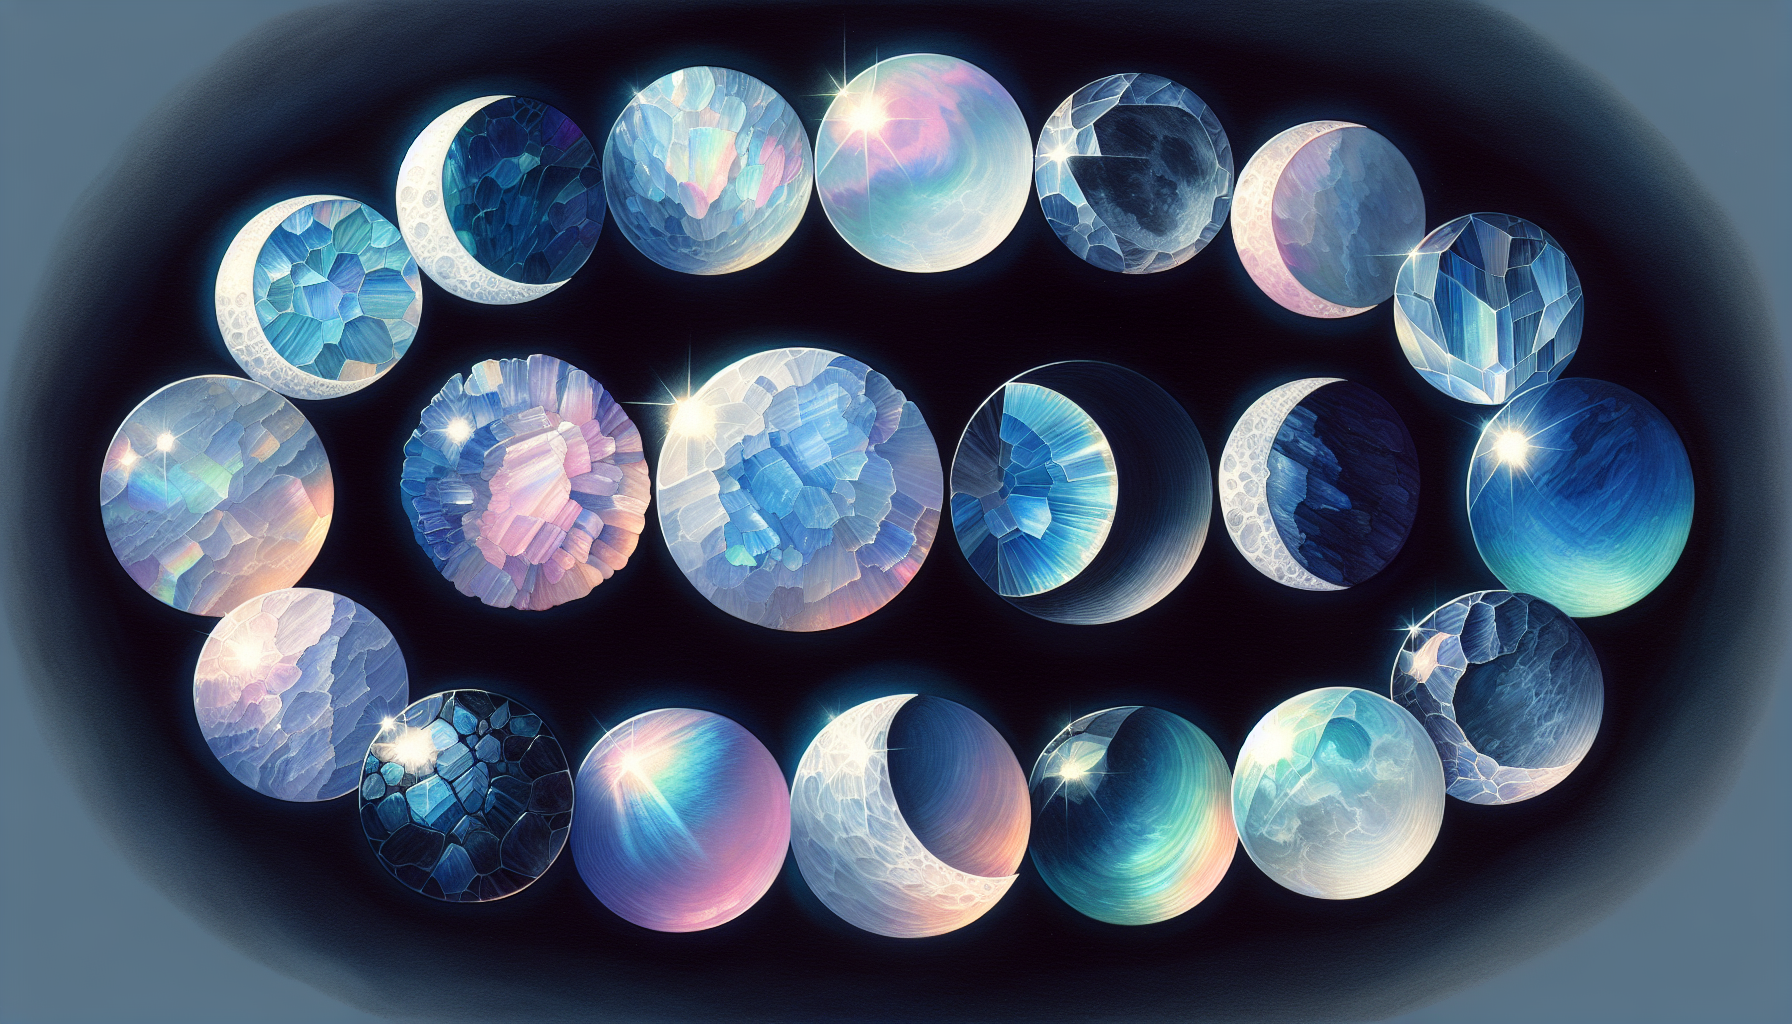 Illustration of various colored moonstones representing the spectrum of moonstone colors